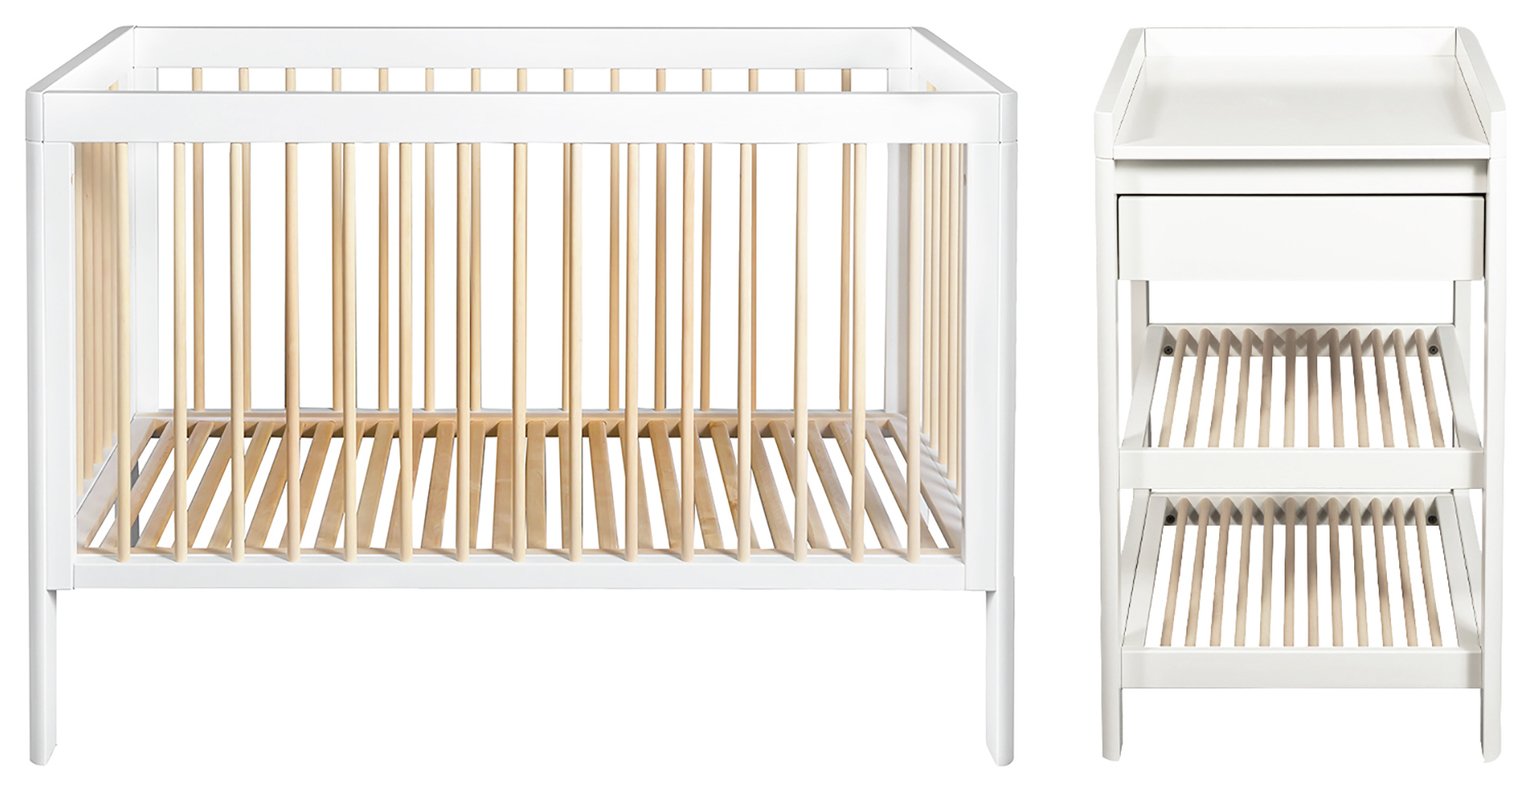 Troll Lukas 2Pc Cot Bed & Changing Table Nursery Set - White